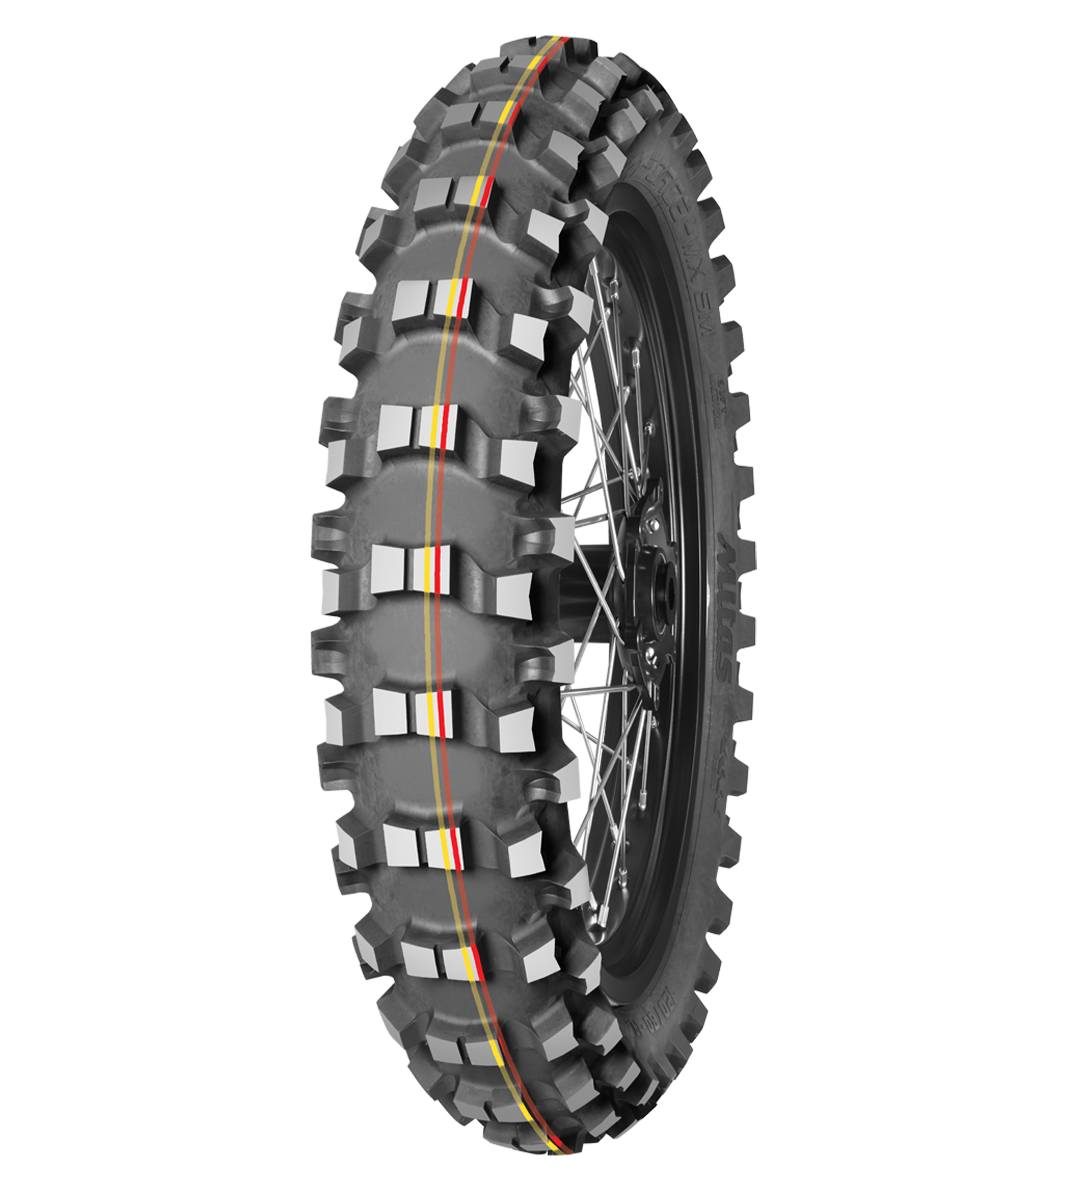 Mitas TERRA FORCE-MX SM 70/100-10 Motocross Competition Off-Road SOFT TO MEDIUM 41J Red &amp; Yellow Tube Rear Tire, 226150, 70/100-10, Motocross, Motocross Competition, Off-Road, Rear, Terra Force, Terra Force-MX SM, Trail, Tires - Imported and distributed in North &amp; South America by Lindeco Genuine Powersports - Premier Powersports Equipment and Accessories for Motorcycle Enthusiasts, Professional Riders and Dealers.